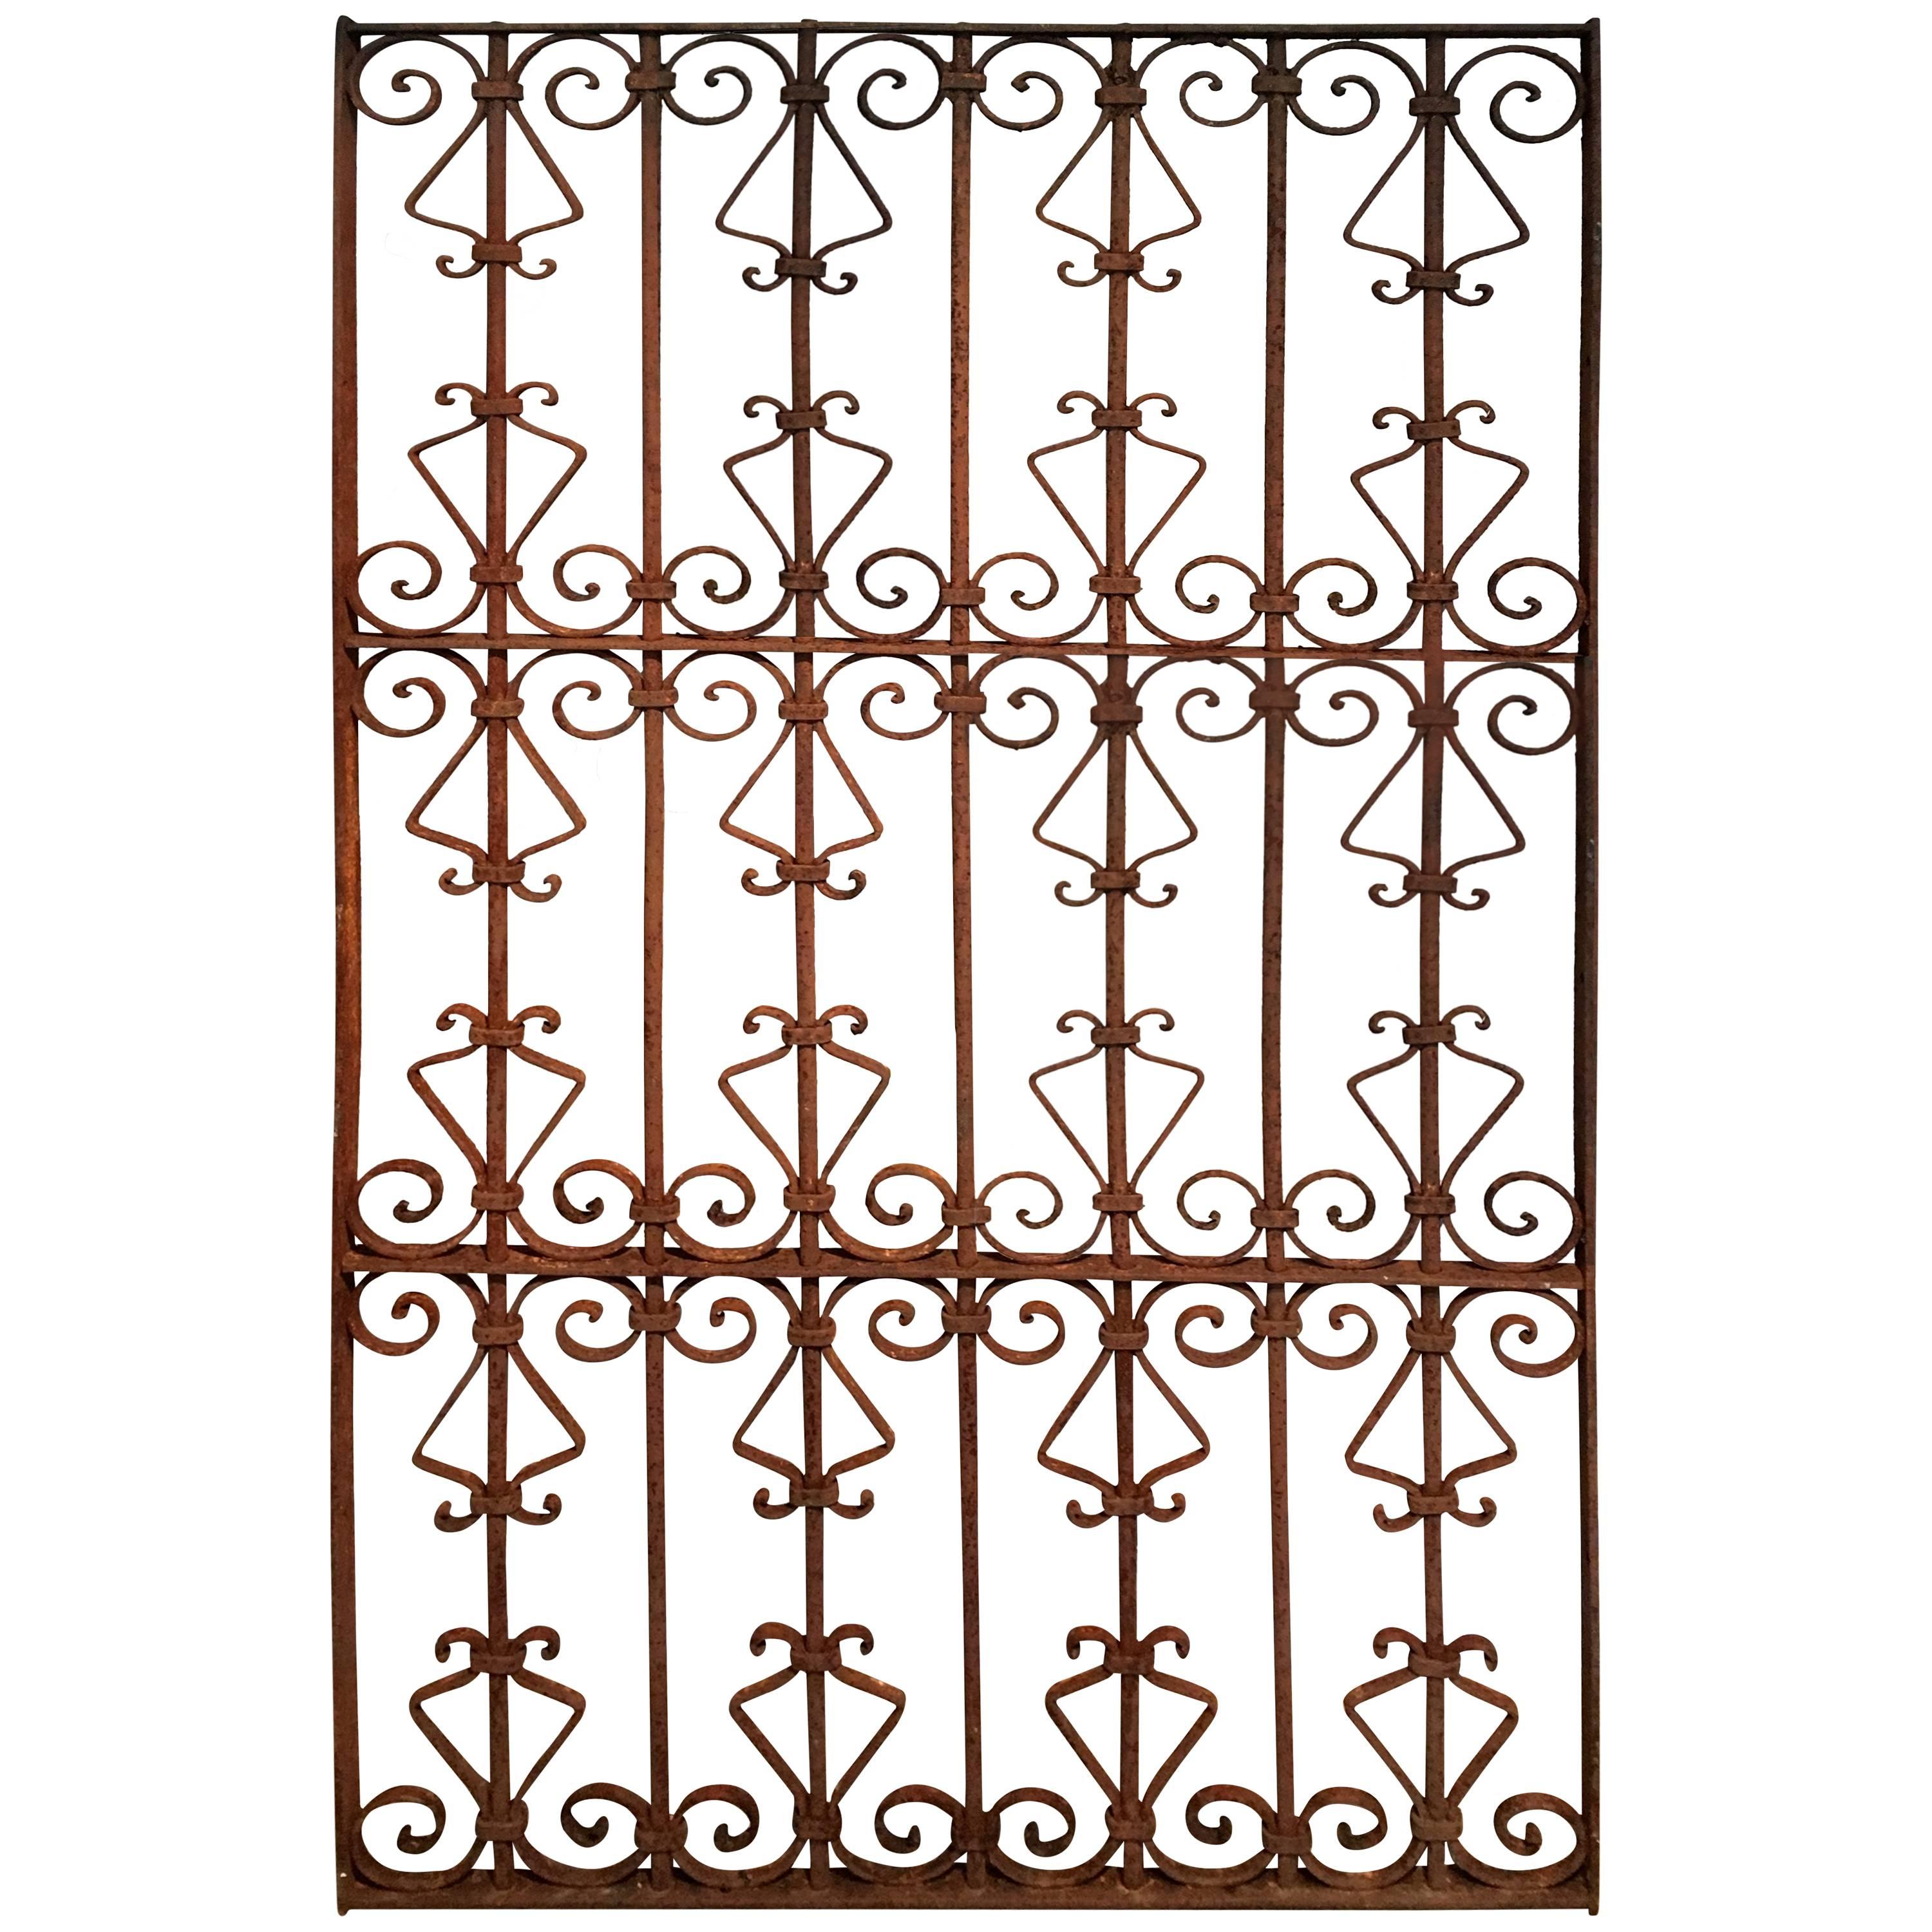 Large Wrought Iron Grille, Gate, or Coffee Table Top at 1stDibs ...